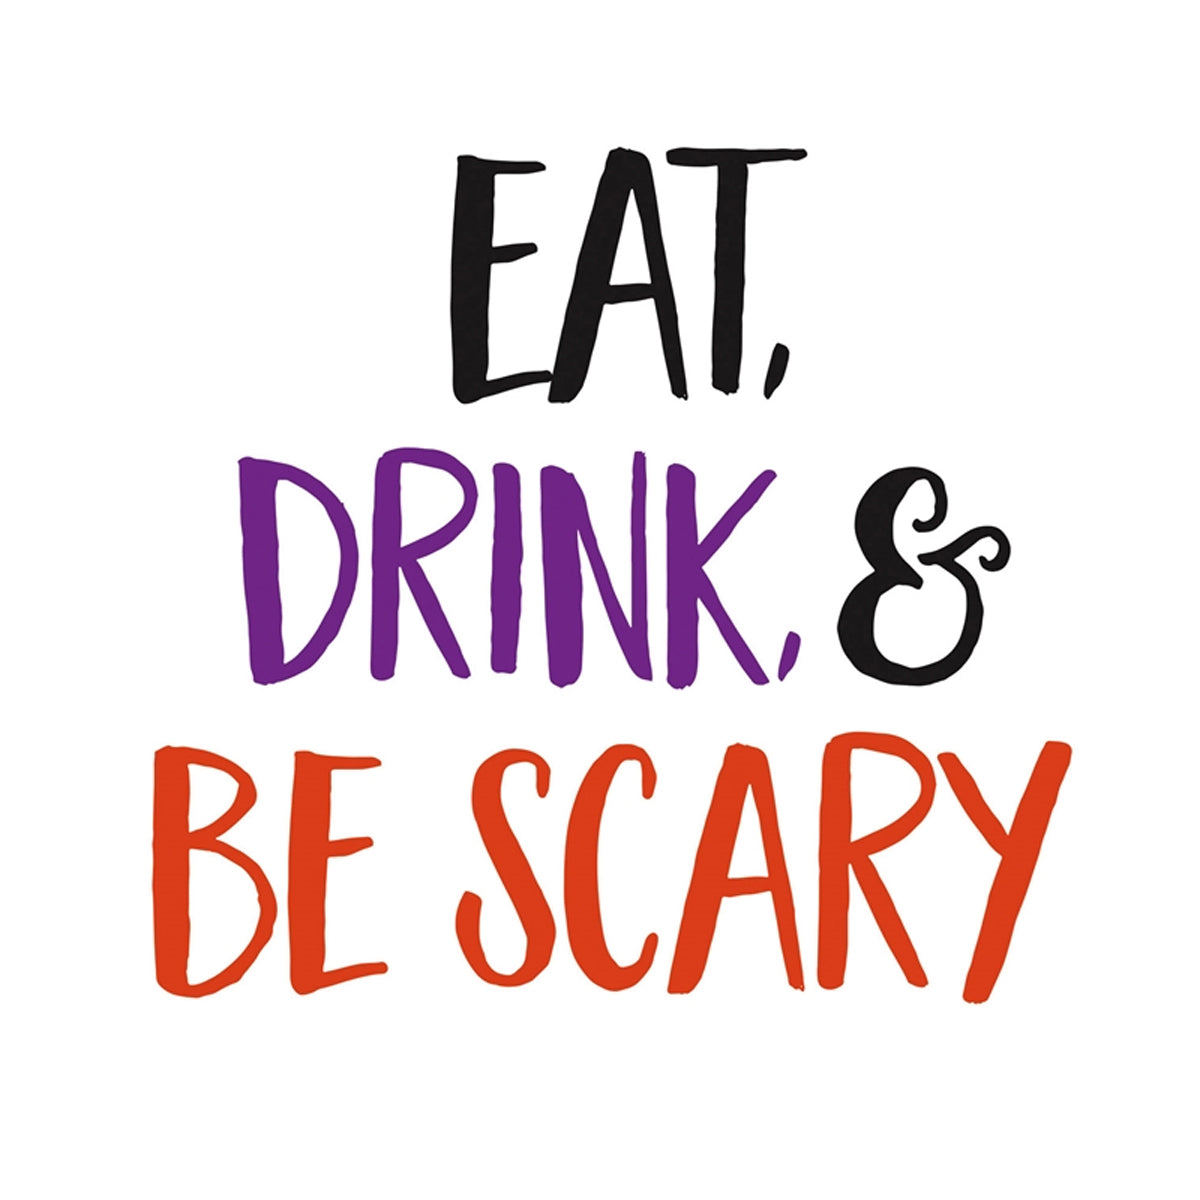 Paper Cocktail Napkin "Eat, Drink, & Be Scary"